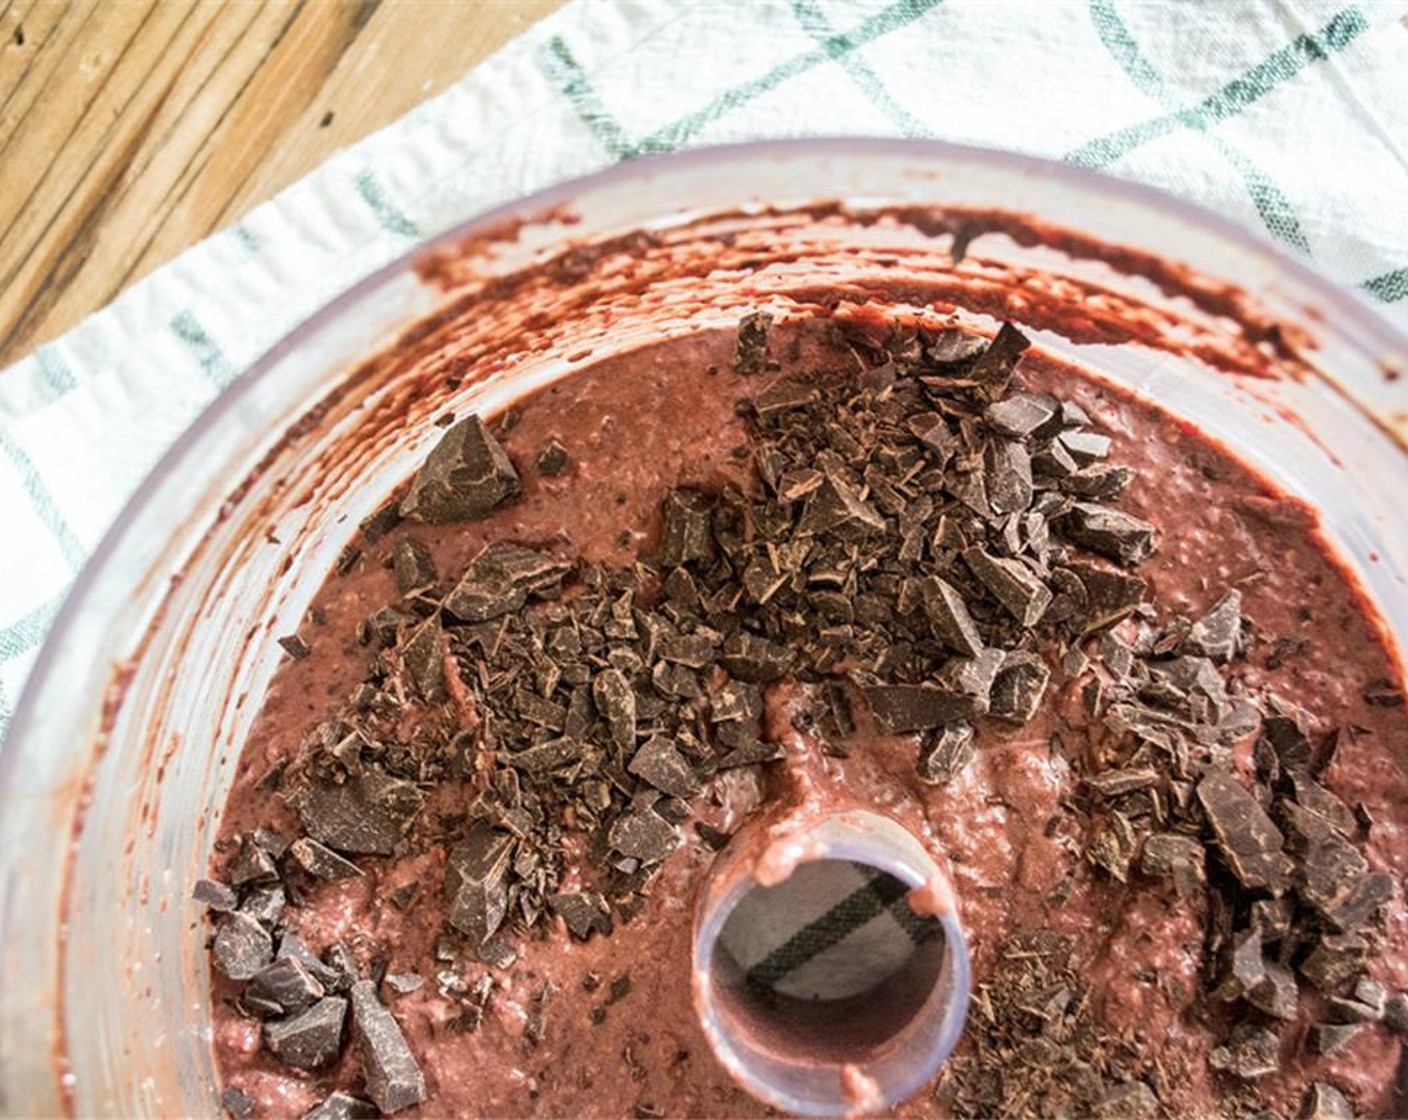 step 4 Add in Beet (1/2 cup) and Canned Black Beans (1 cup). Blend 10 to 20 seconds or until the mixture has formed a thick batter. Stir in Dark Chocolate (1/4 cup).